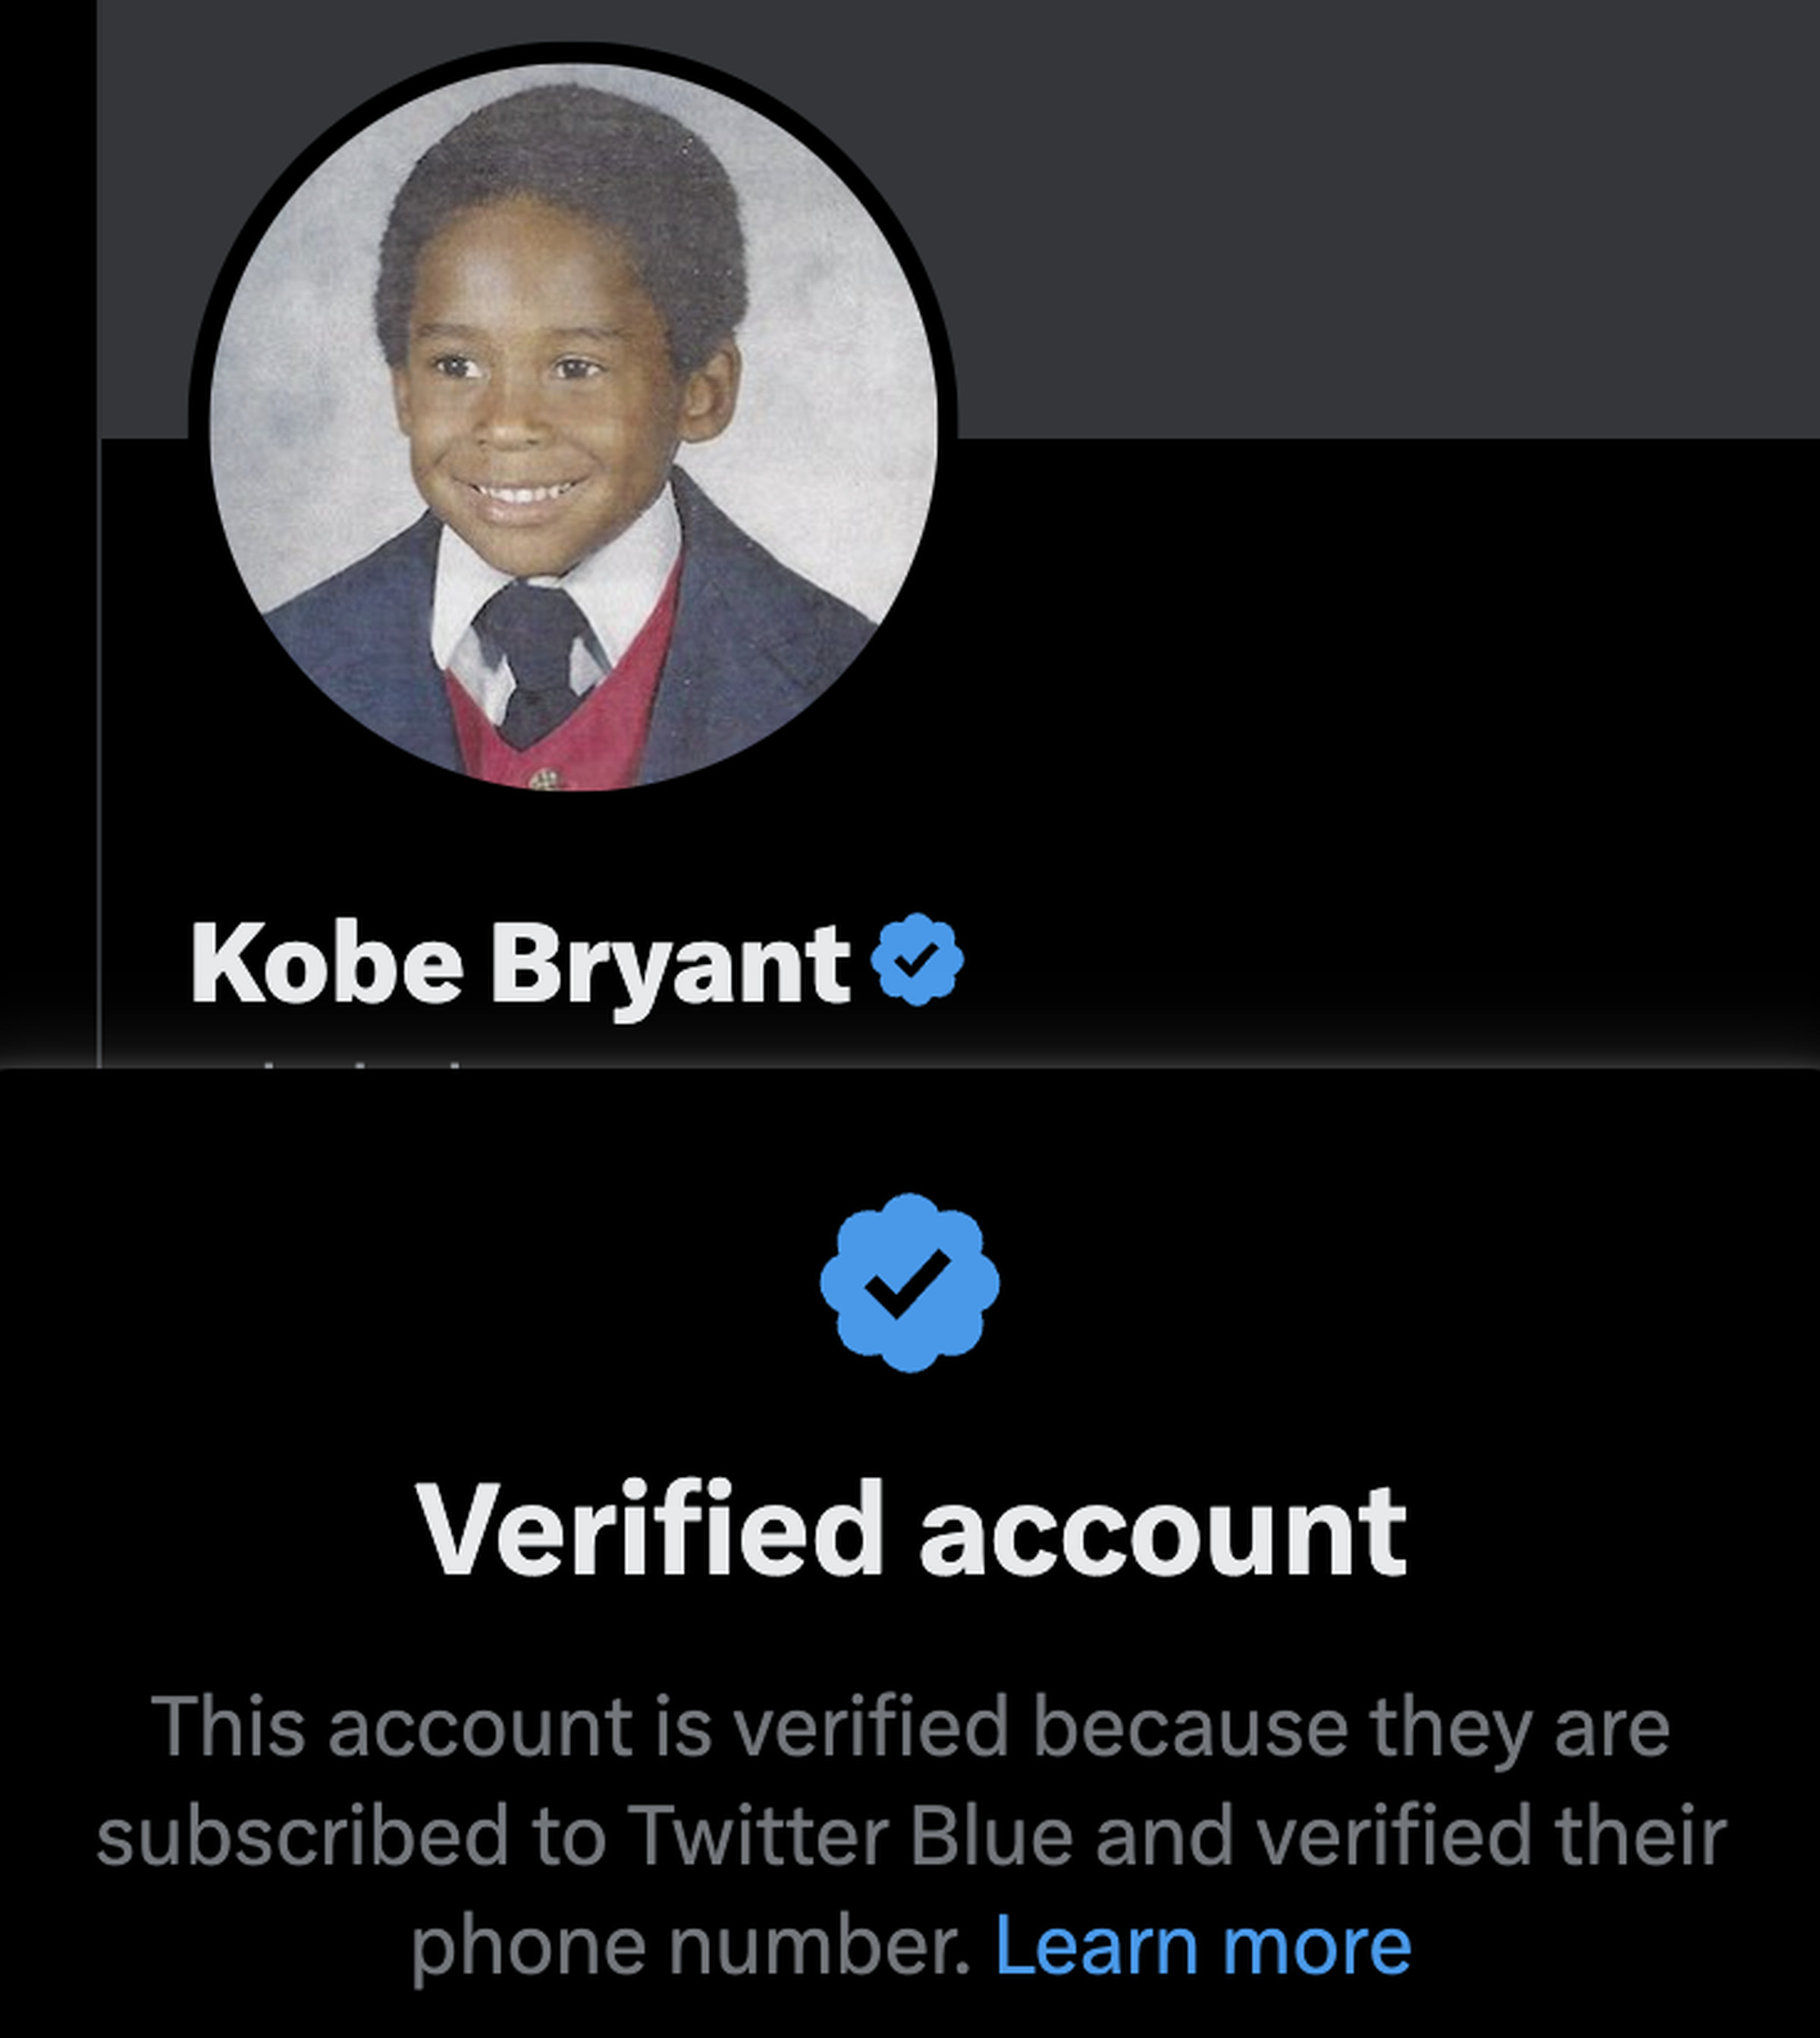 A screenshot of the Twitter profile page for Kobe Bryant showing his blue tick and status as a “verified account.”